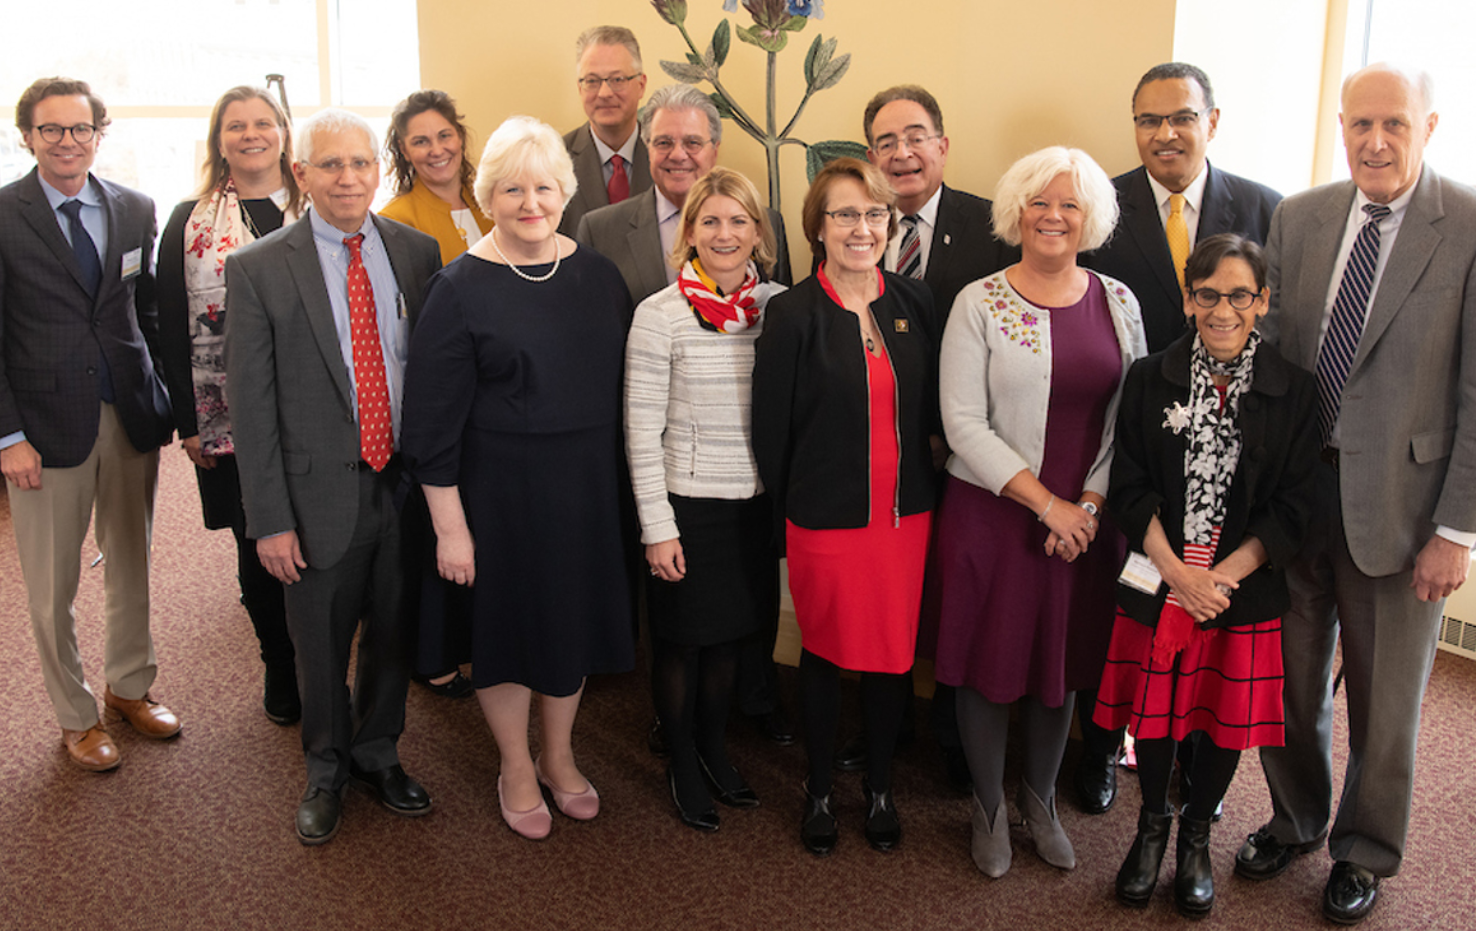 Members of the steering committee that guides the Age-Friendly University partnership between UMB and UMBC gather with leaders of UMB, UMBC, and USM.